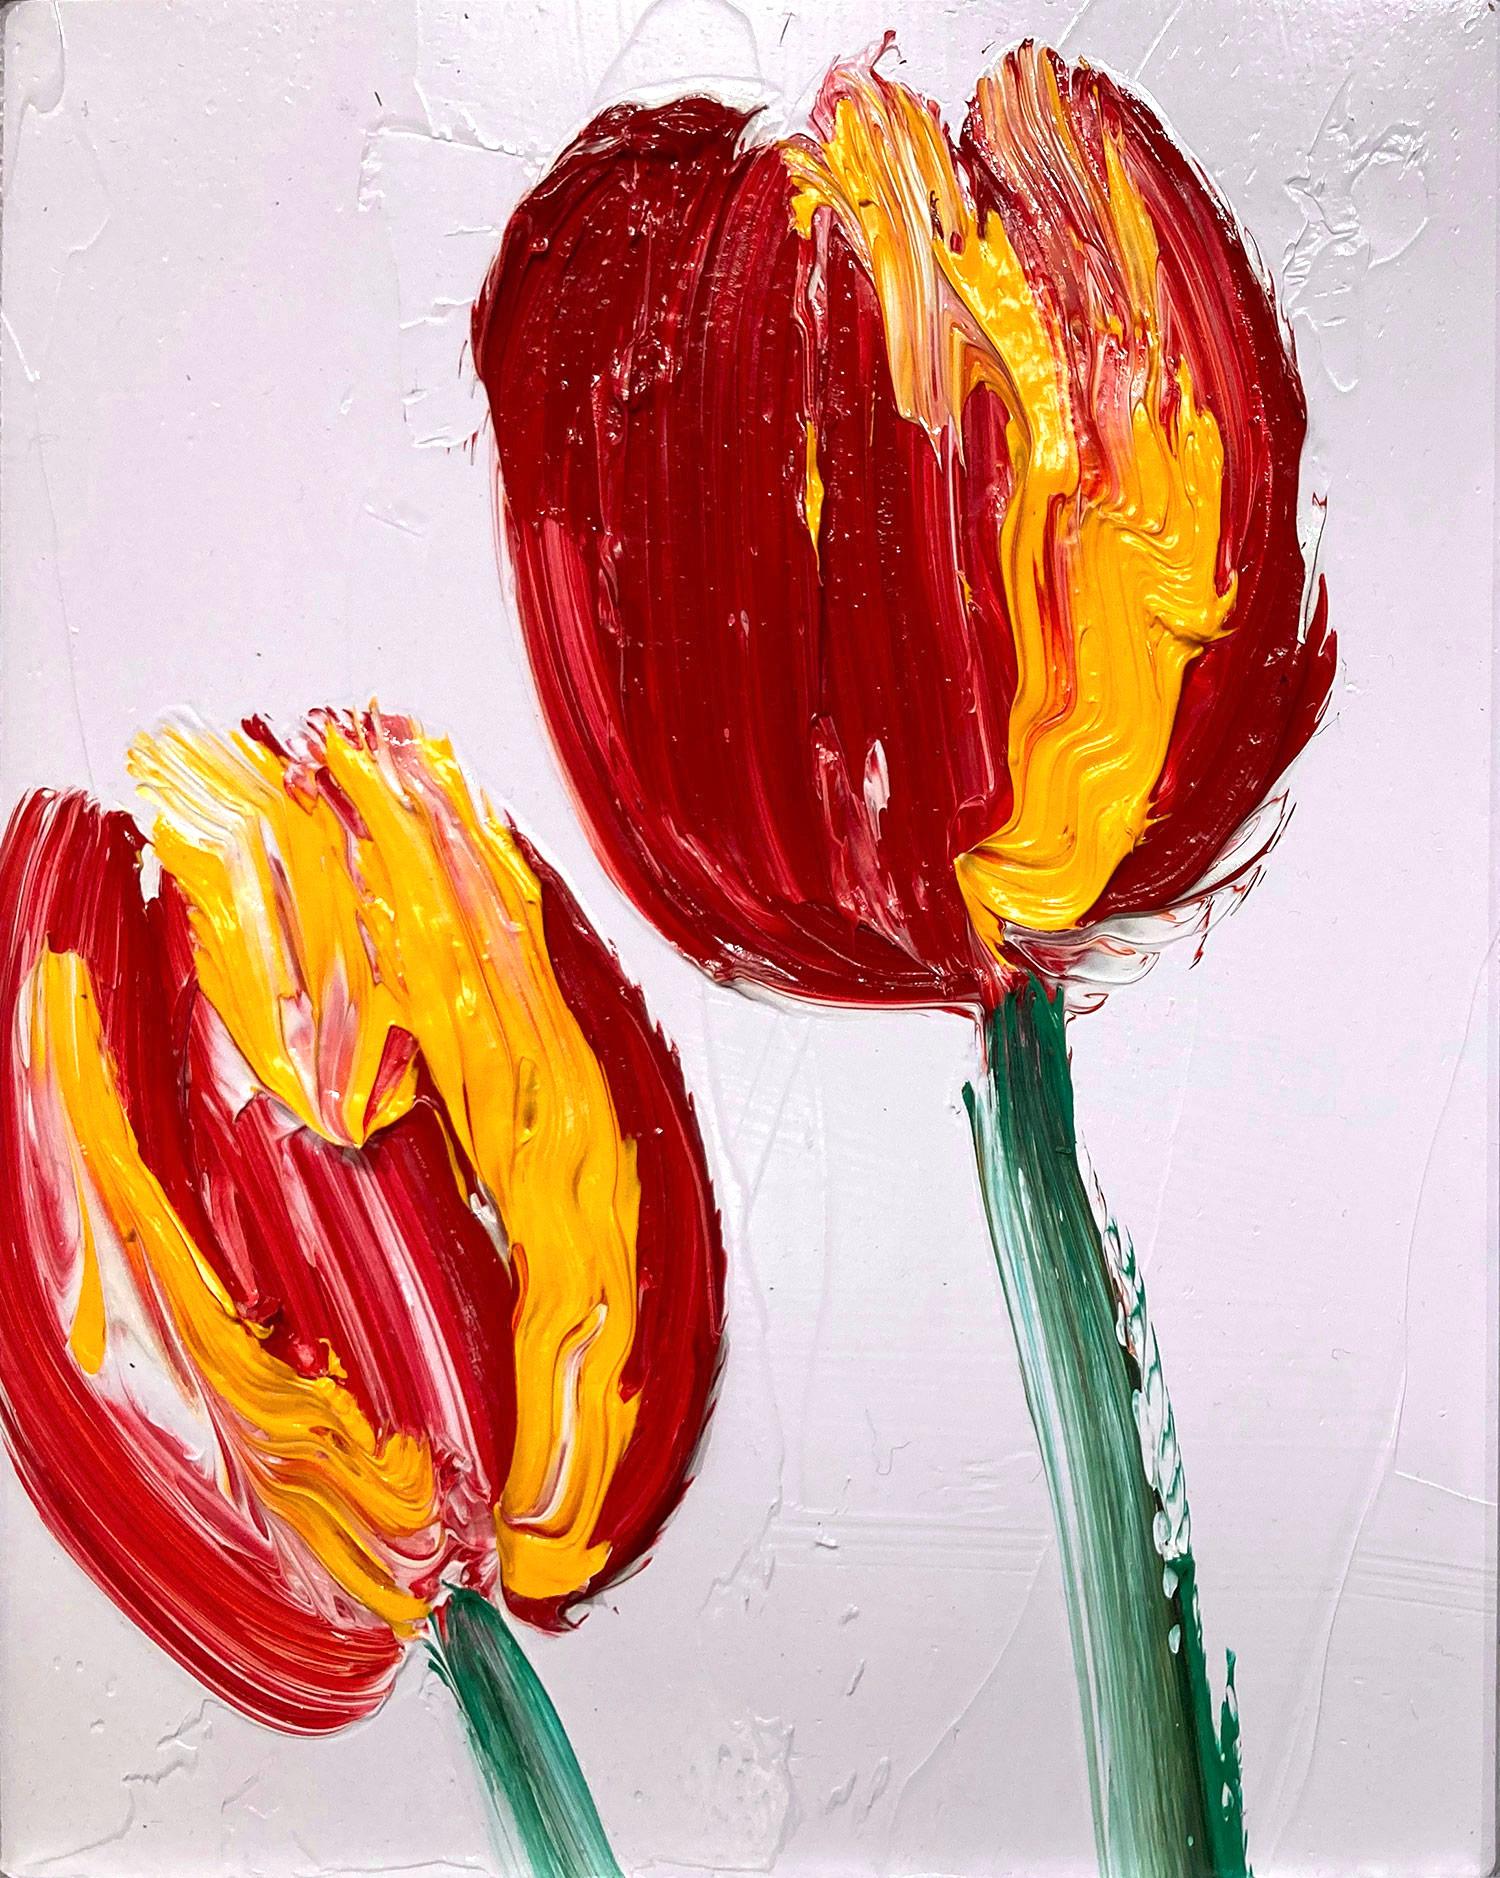 A wonderful composition of one of Slonem's newest series, Tulips. This piece depicts gestural figures of red and yellow Tulips on a light lavender background with thick use of paint. It is housed in a wonderful silver style frame. Inspired by nature